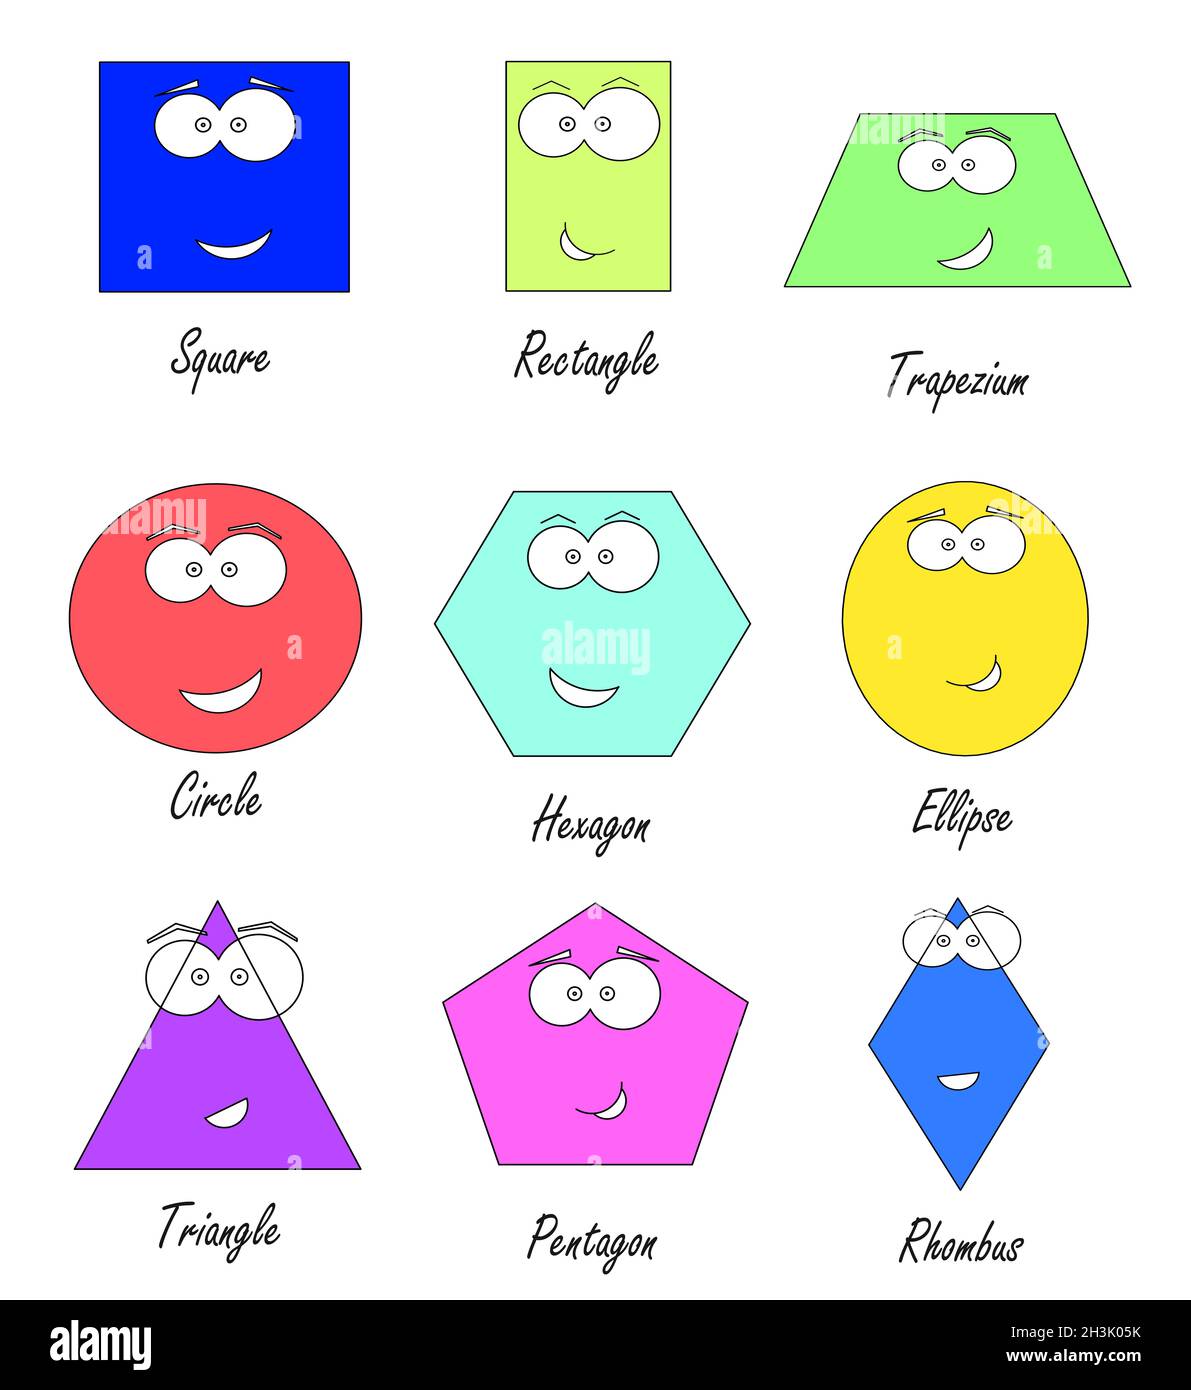 geometric shapes with funny faces - school education for kids Stock Photo